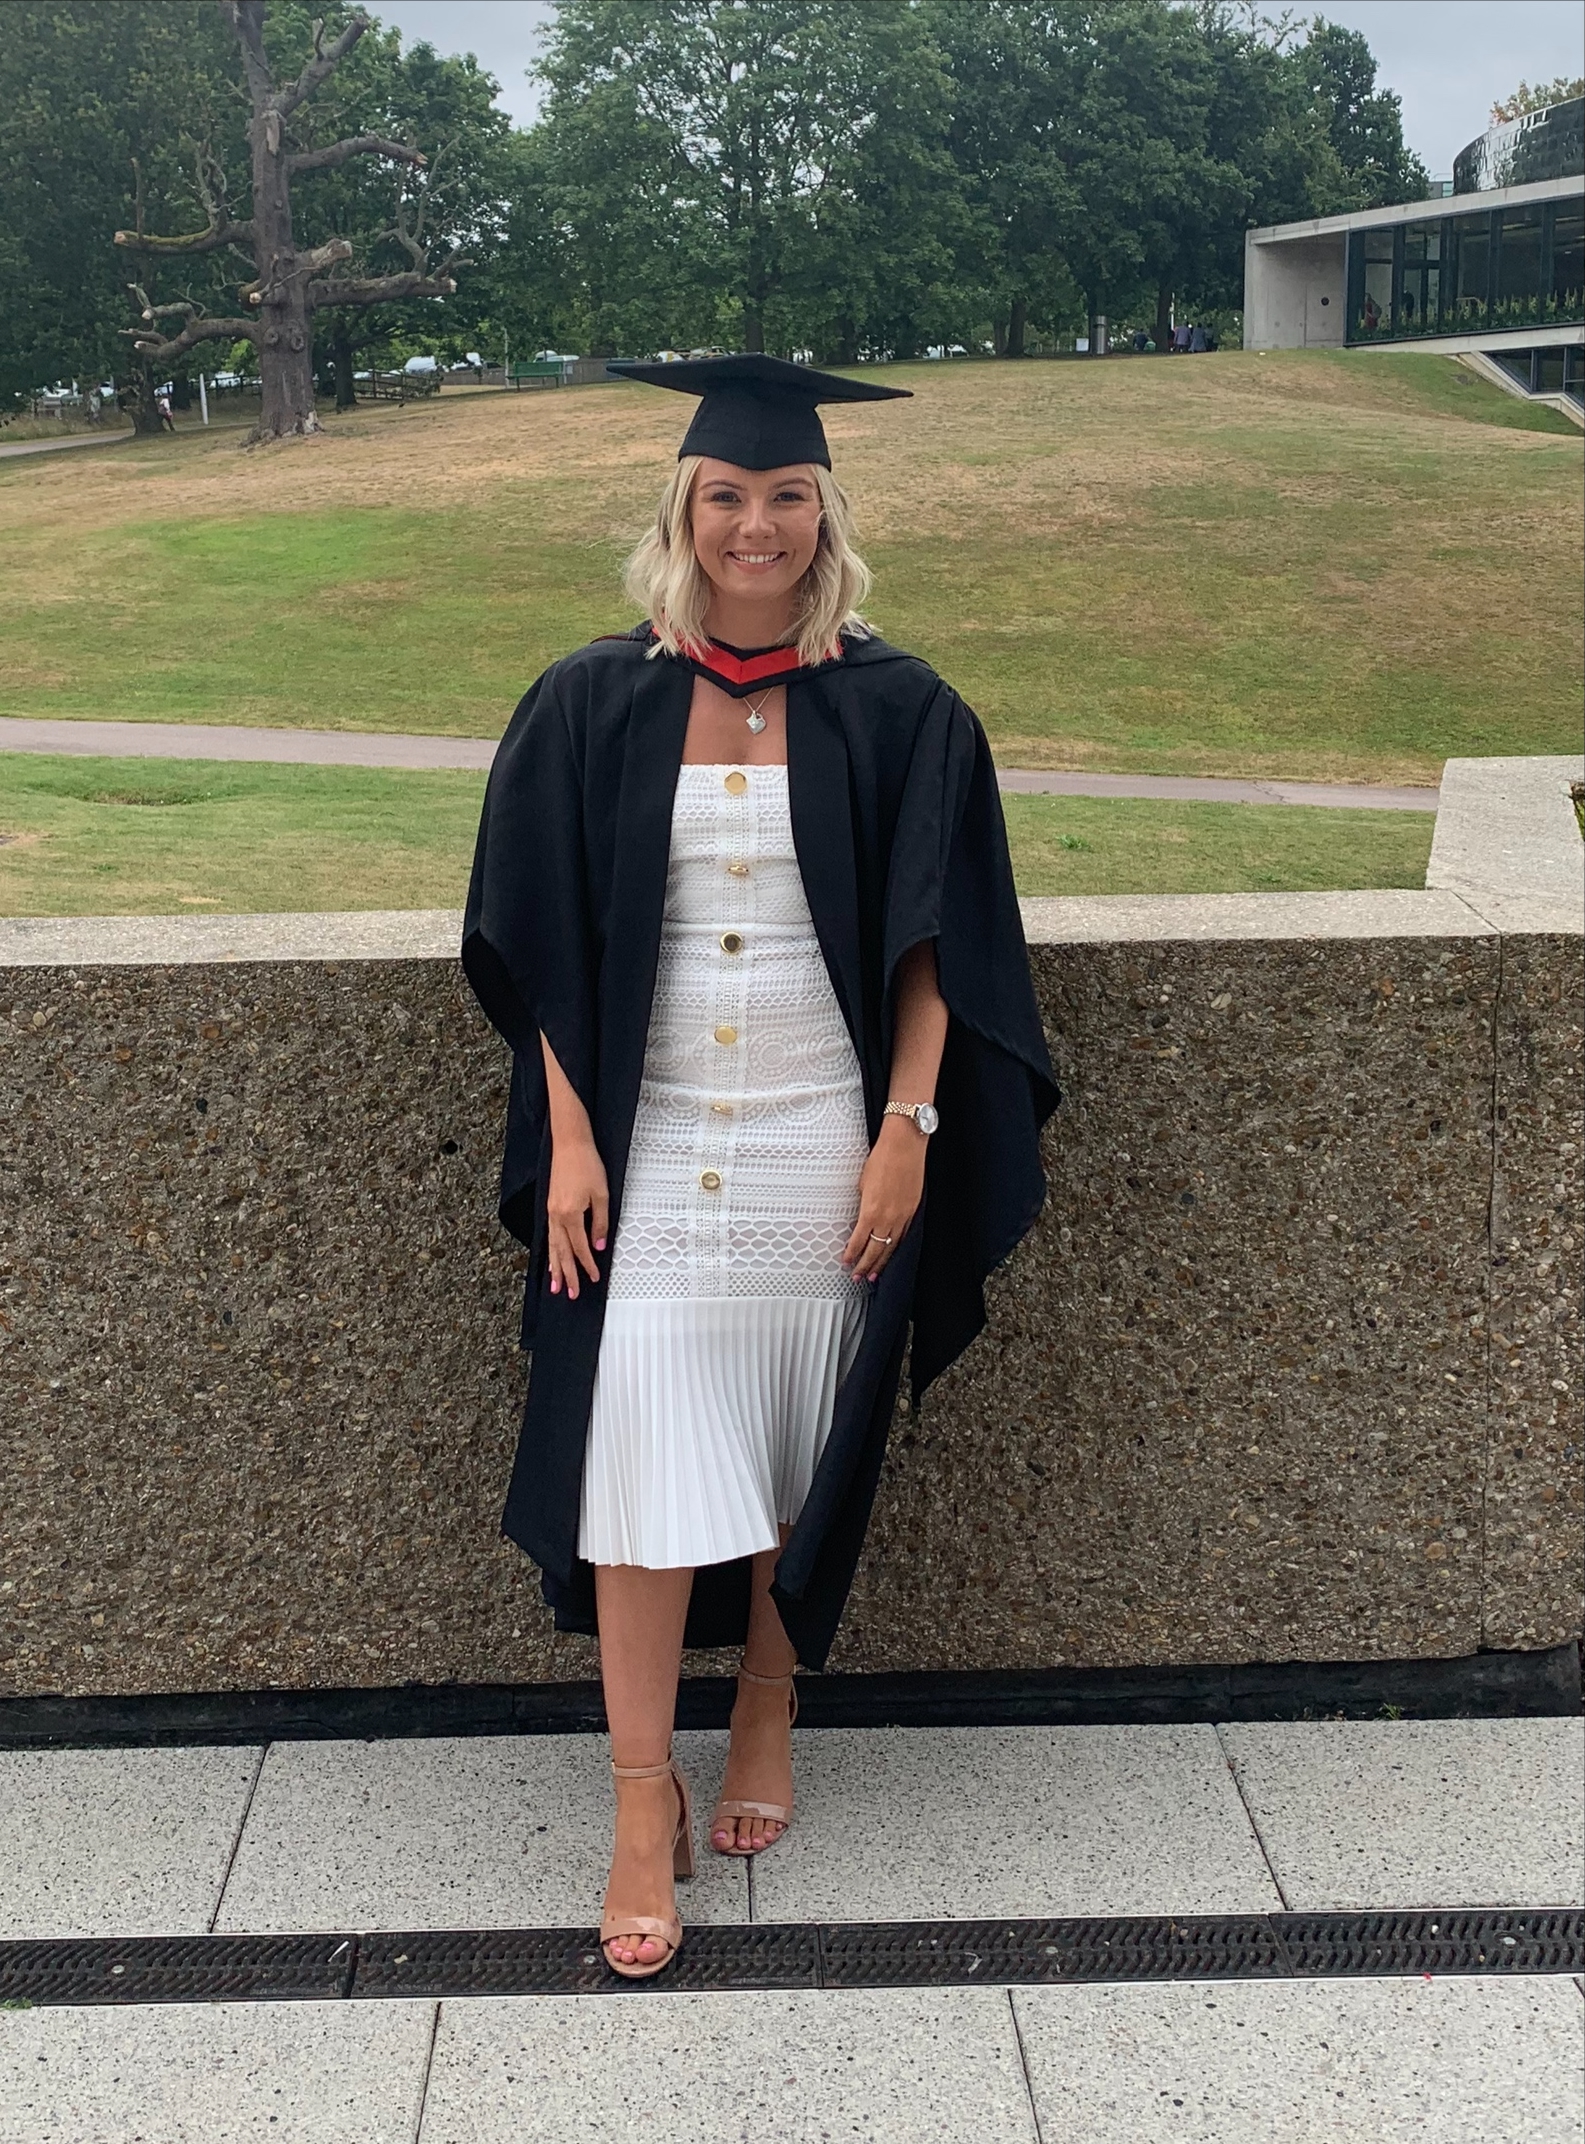 MSc HRM Student Molly Stevens pictured at her graduation